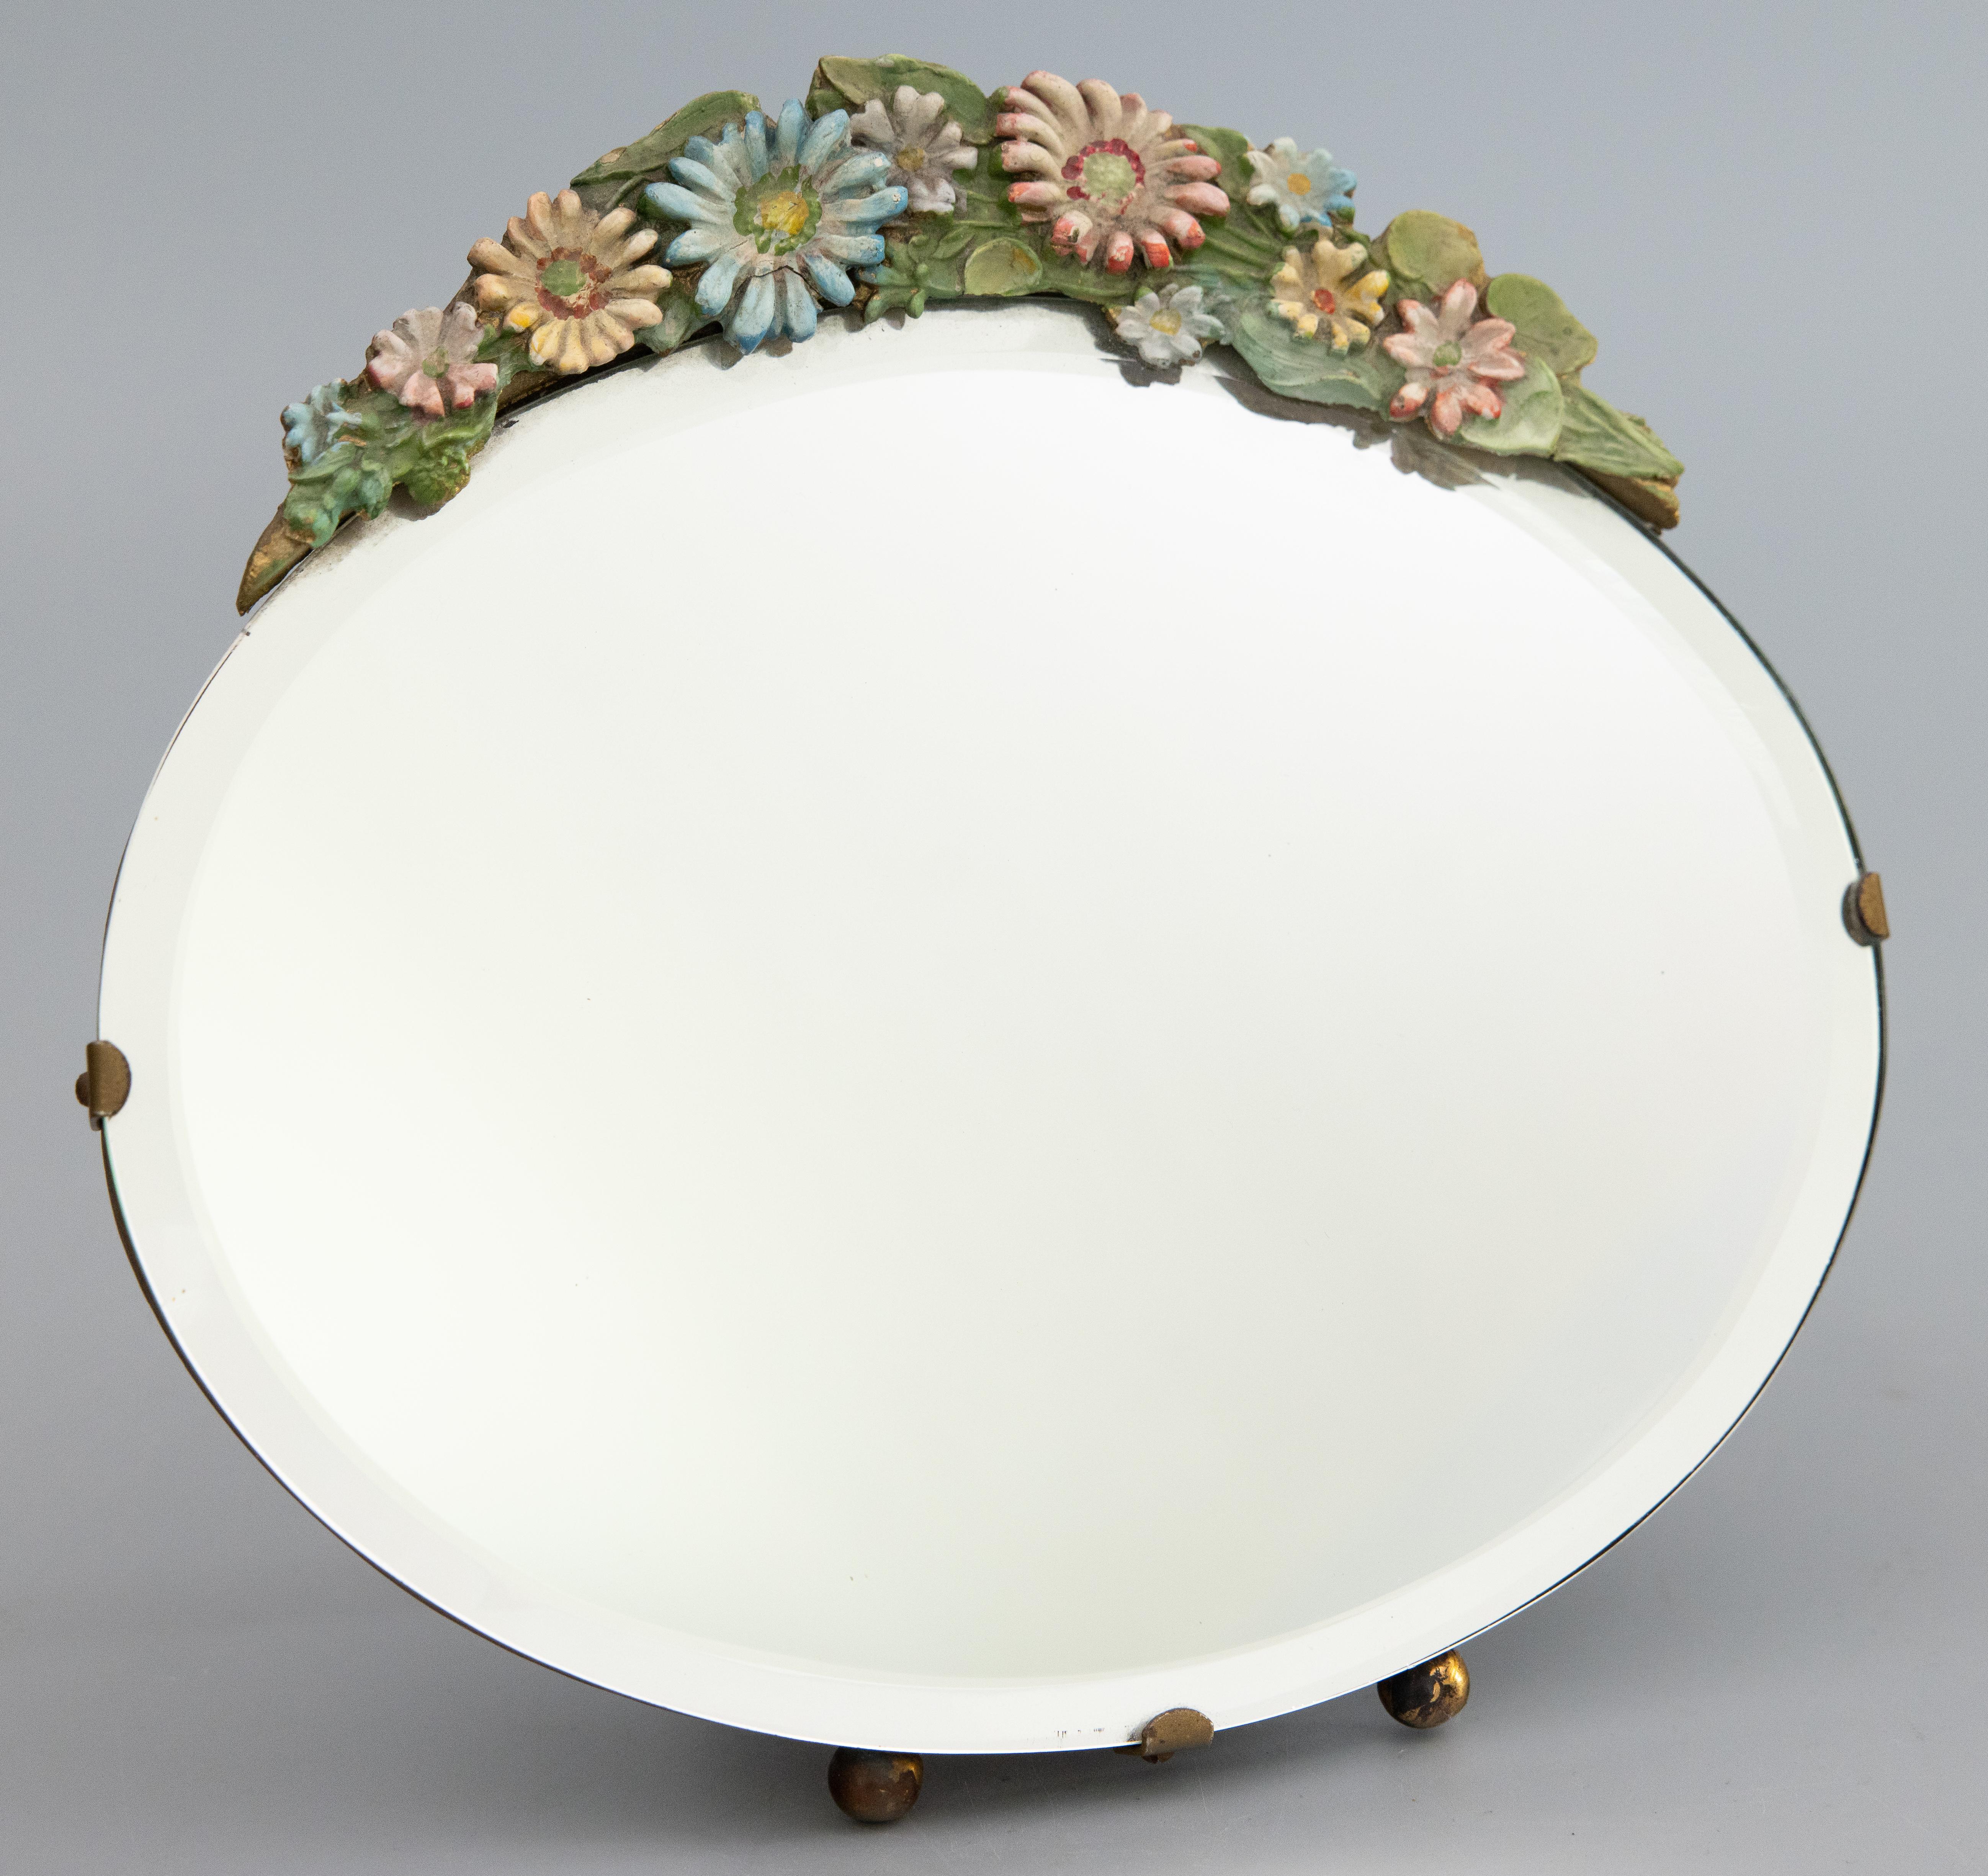 A fine antique English barbola dressing table or vanity oval mirror with easel, circa 1920. This beautiful mirror has beveled glass and is crowned with a gesso floral swag. It would be lovely displayed on a dresser, vanity, or small